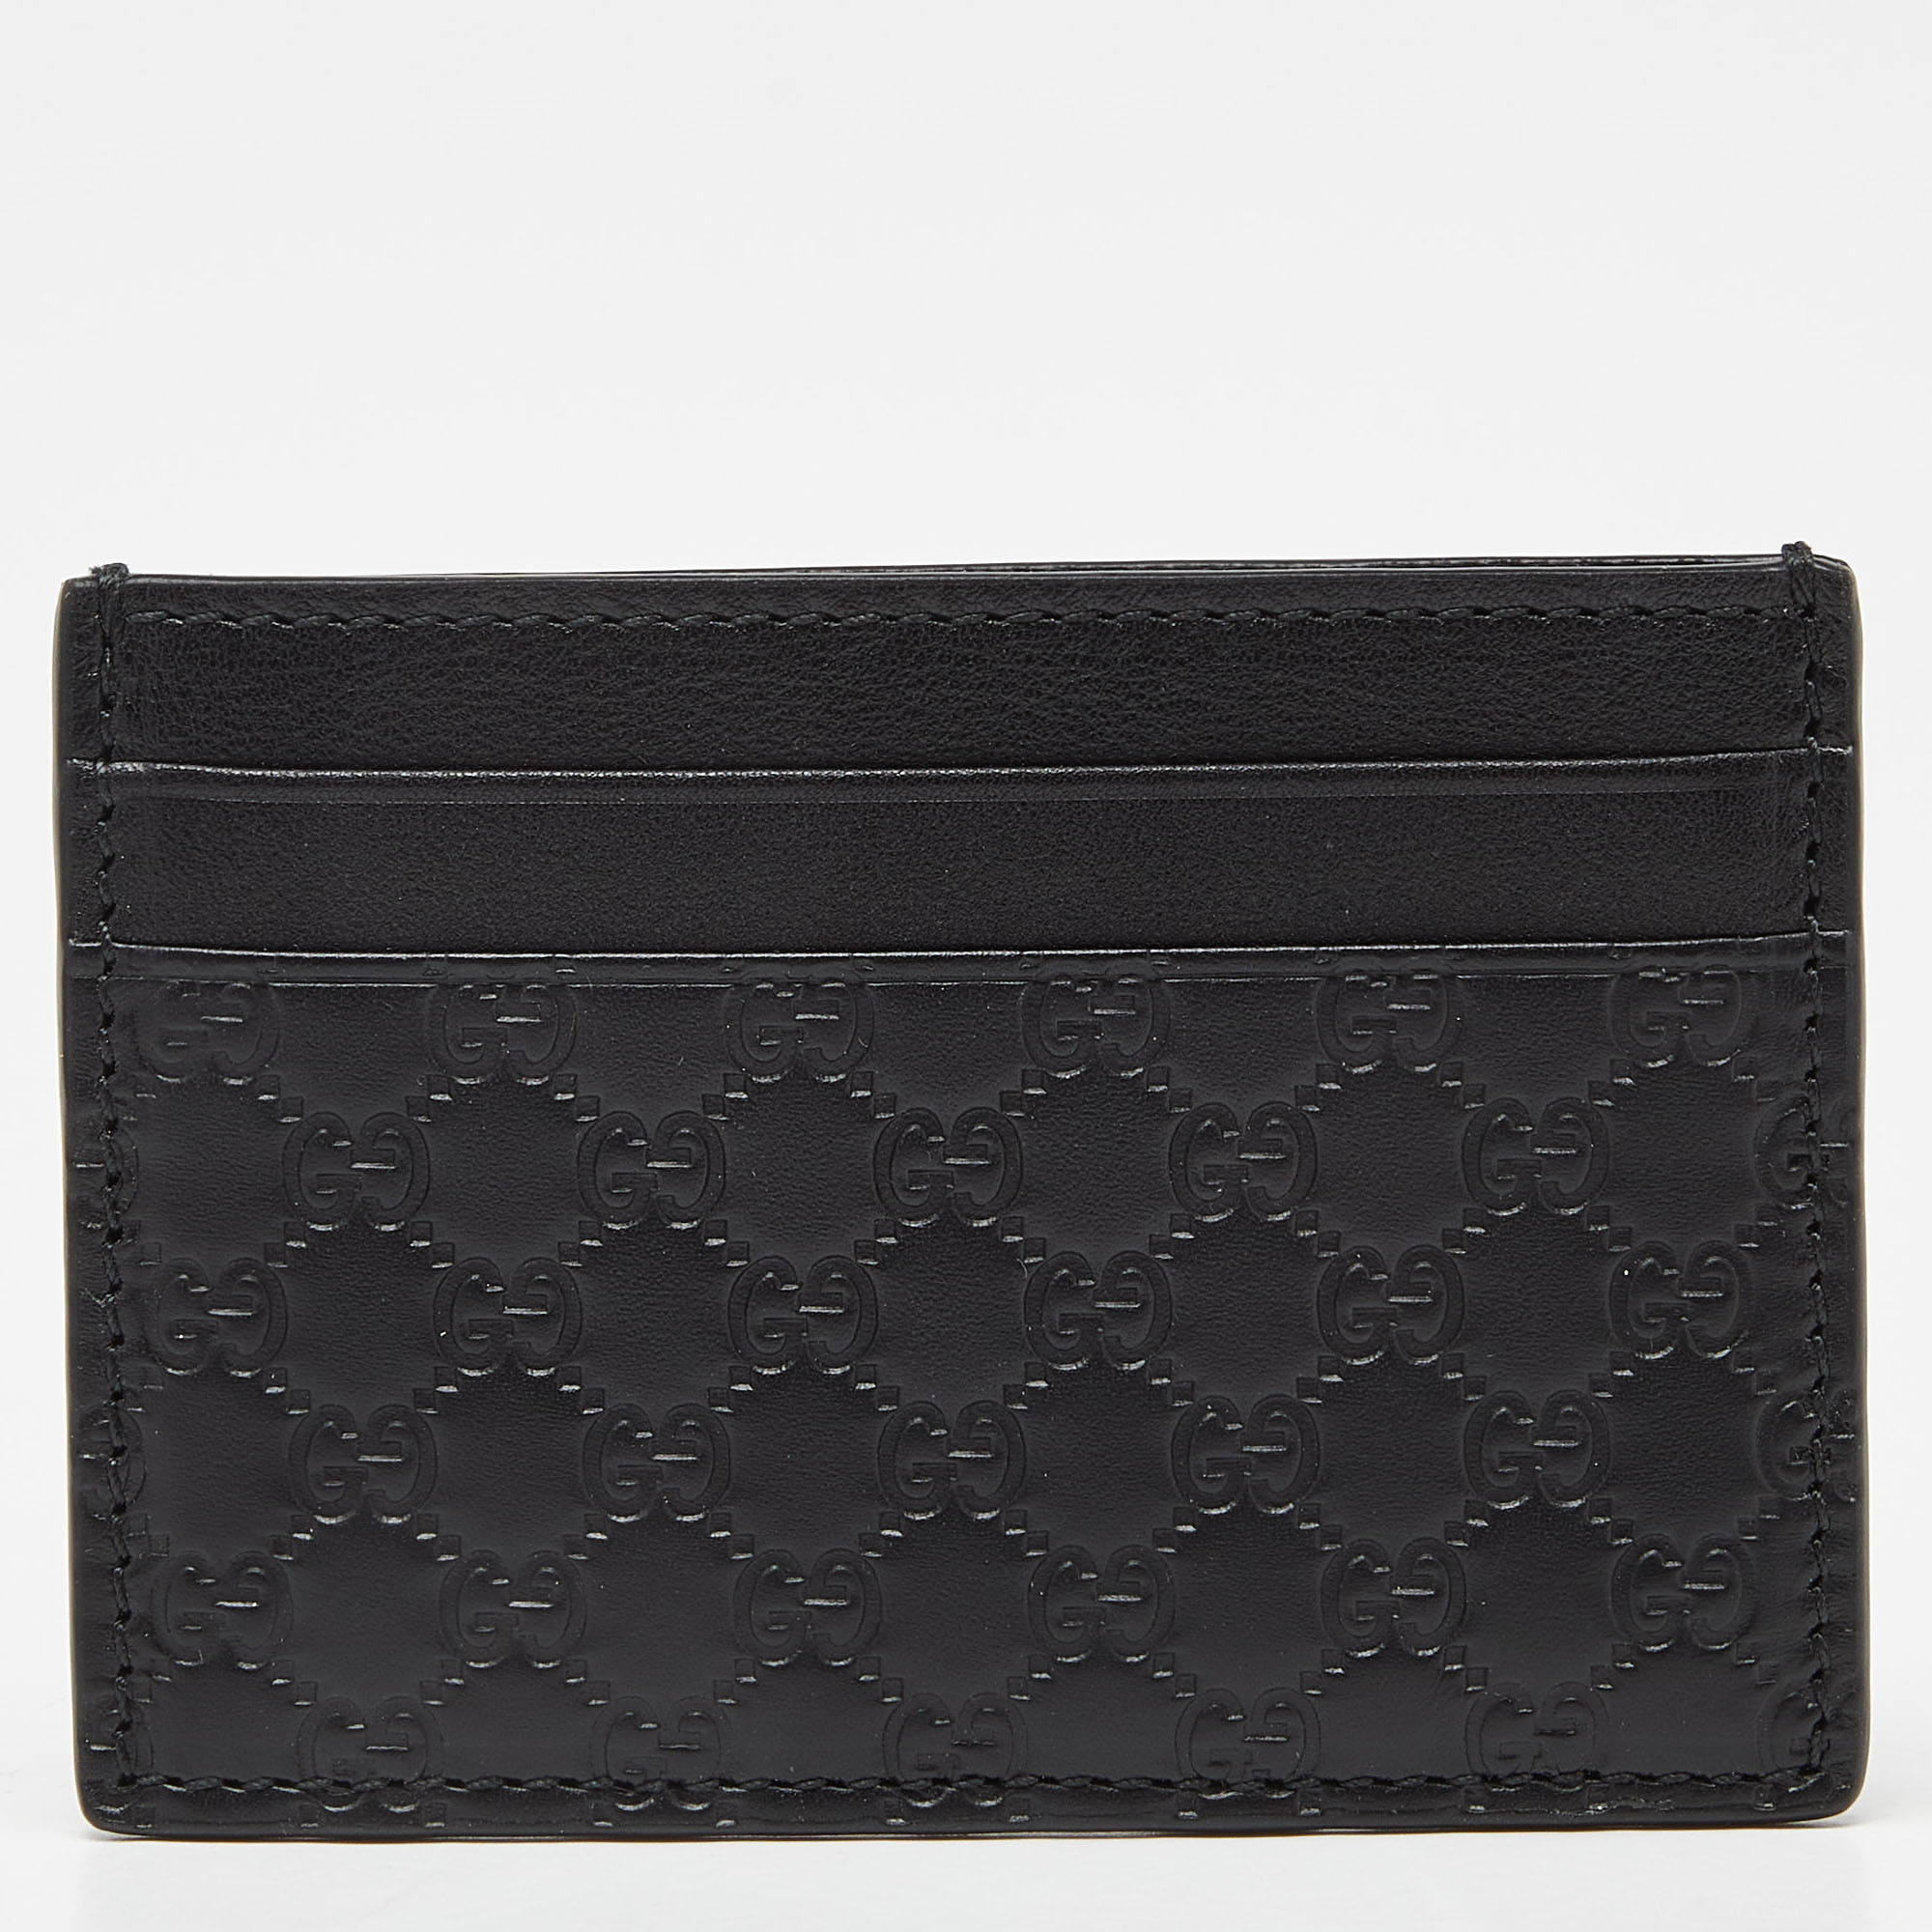 Pre-owned Gucci Black Microssima Leather Card Holder